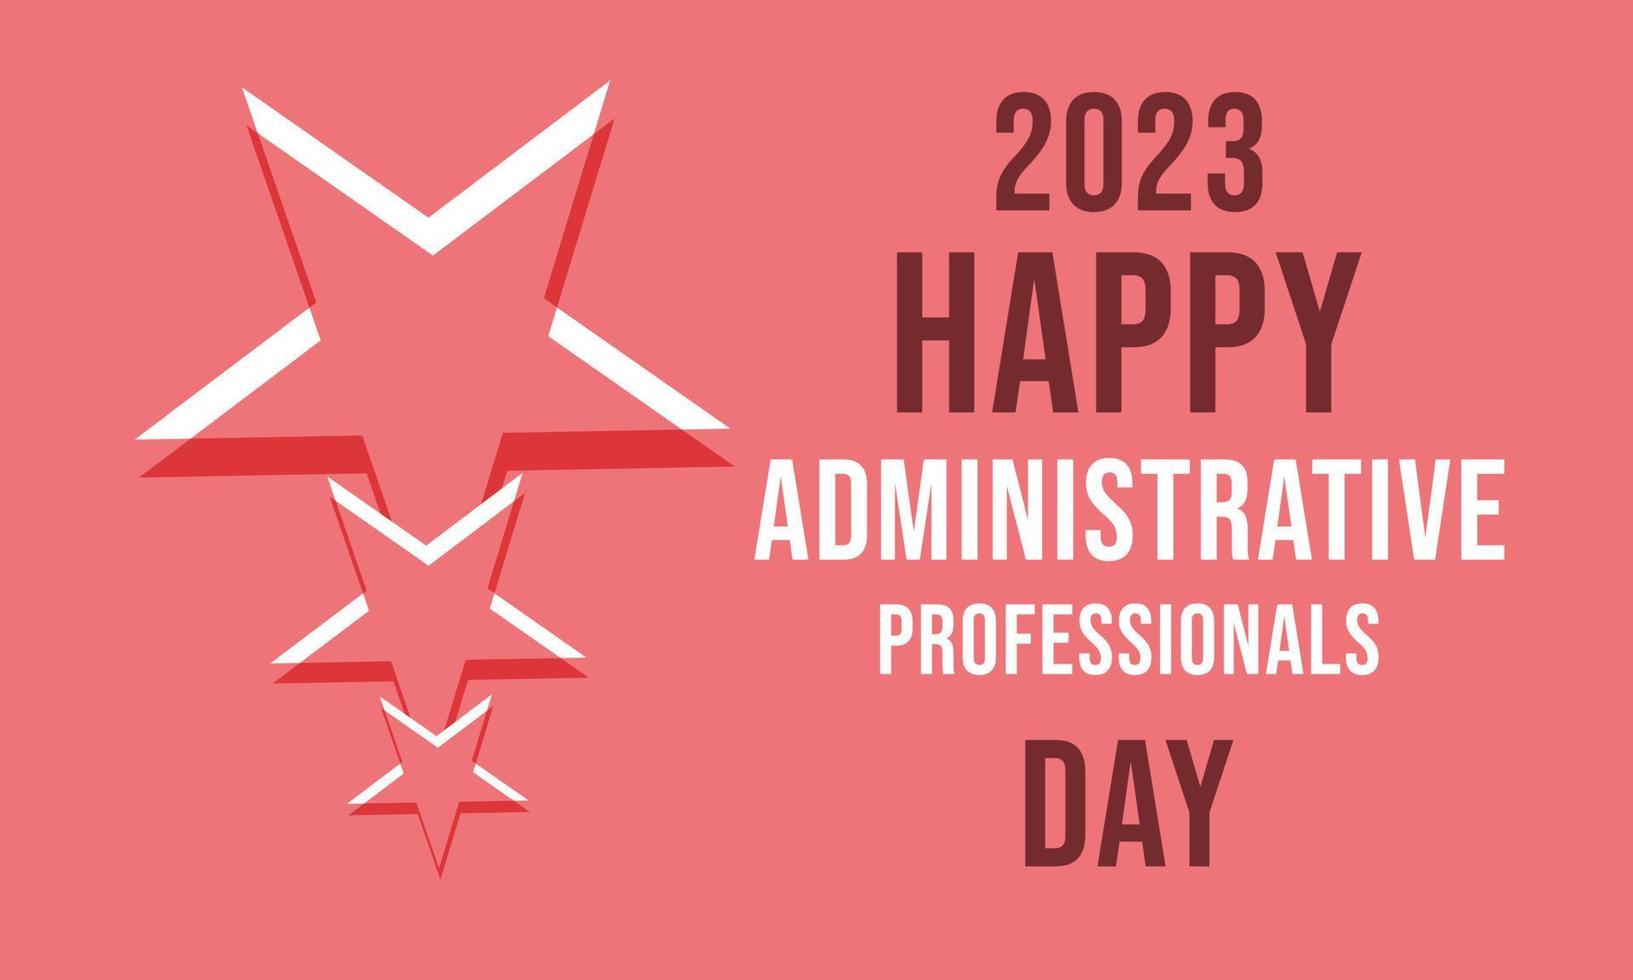 Happy Administrative Professionals Day. Template for background, banner, card, poster vector